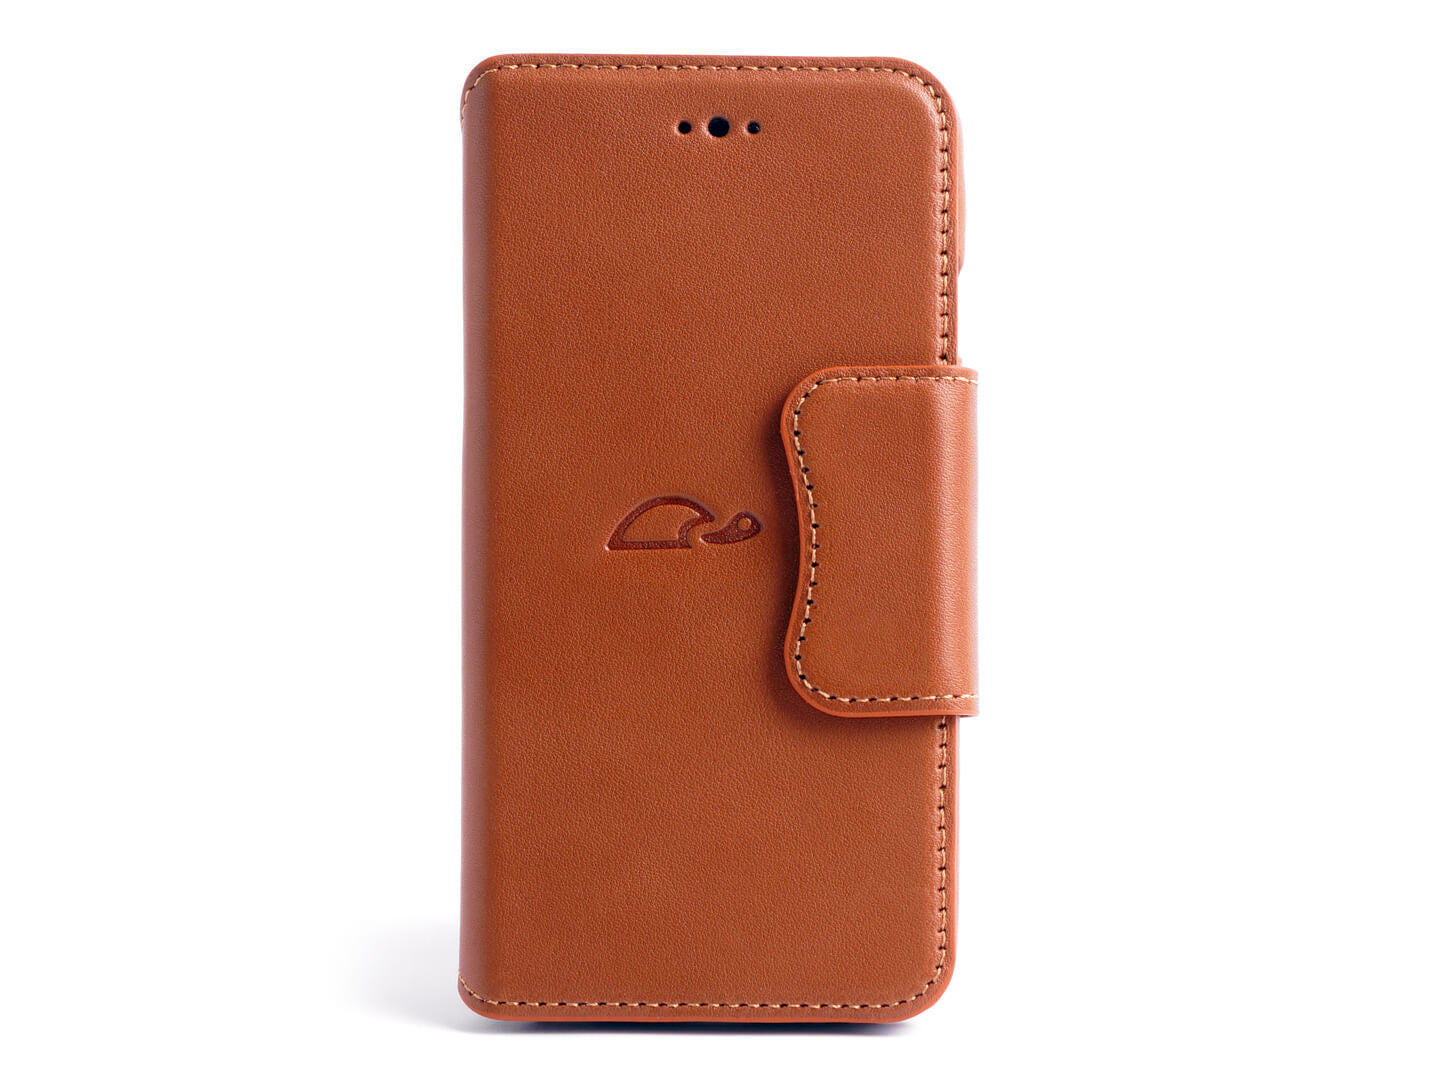 iPhone 6 Leather Wallet Case With Cards Pocket and function - Carapaz